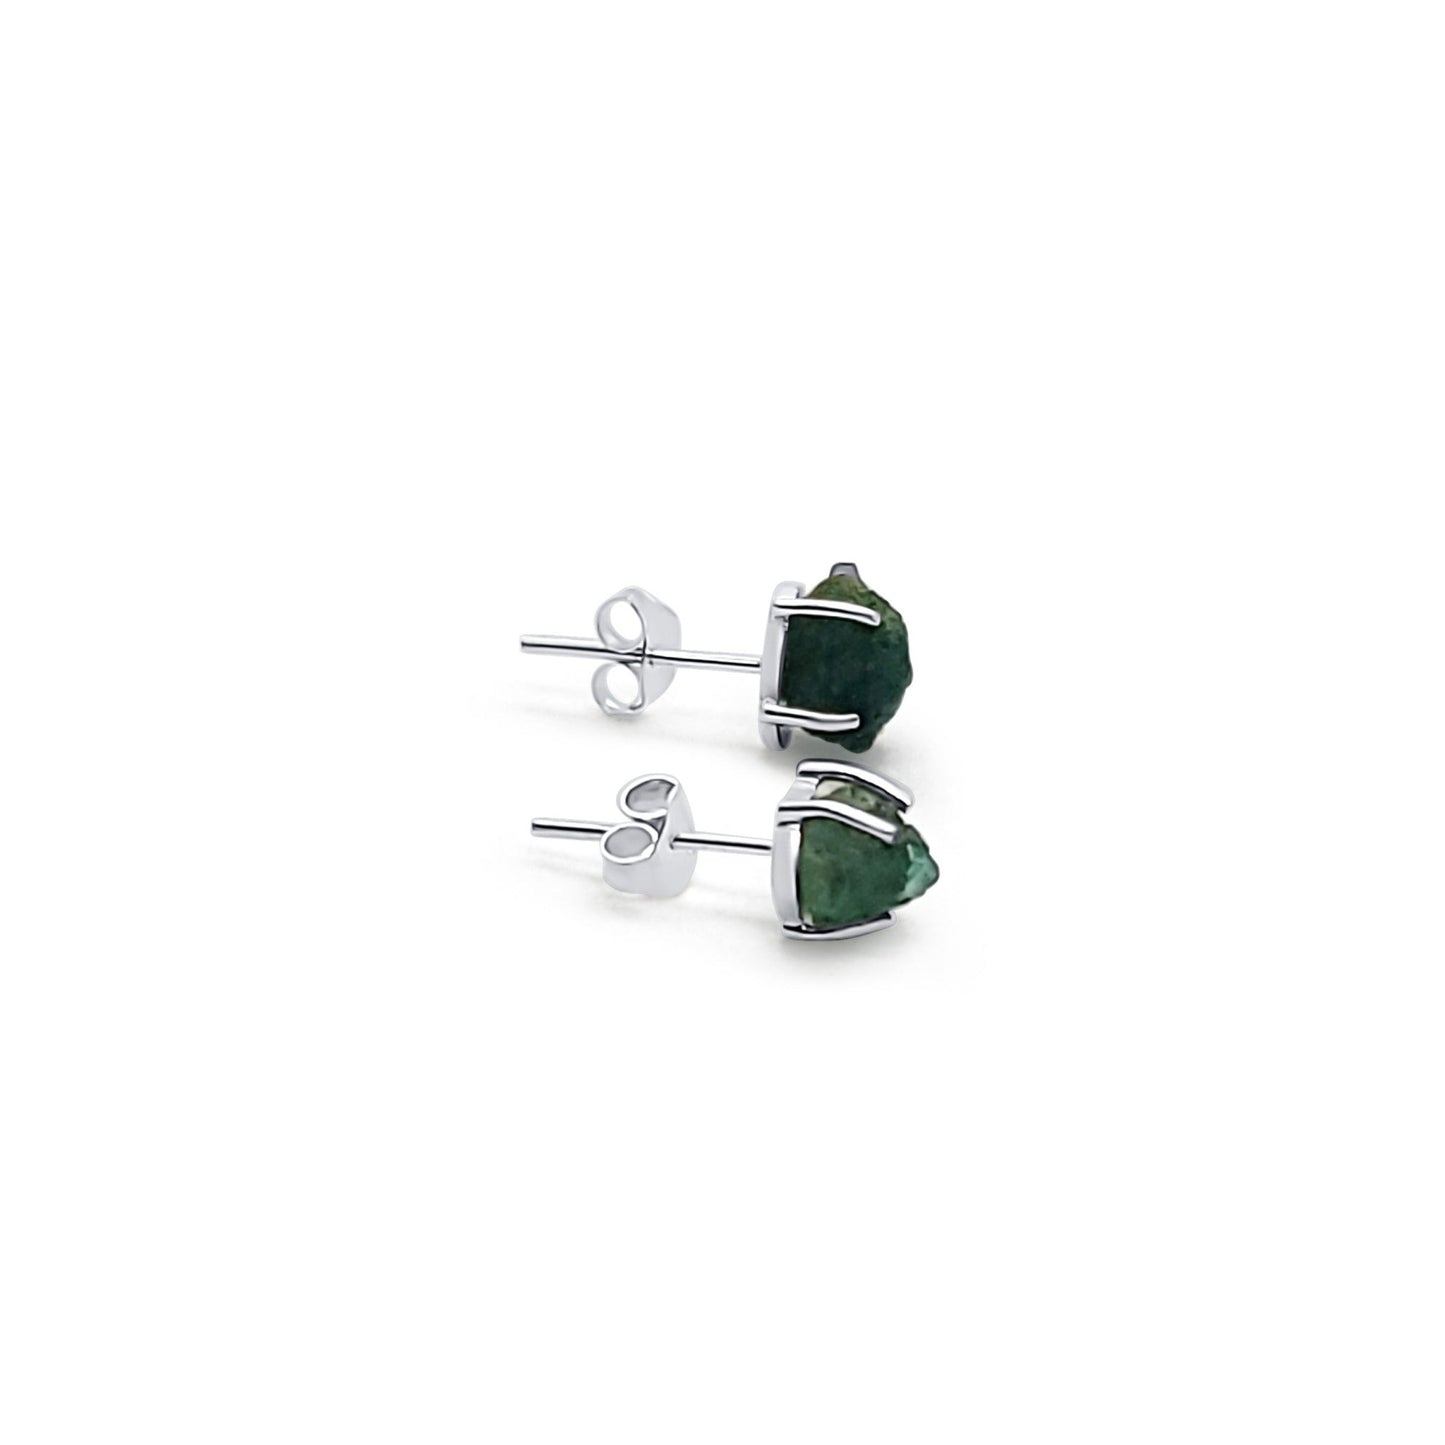  natural raw emerald silver stud earrings with prong setting